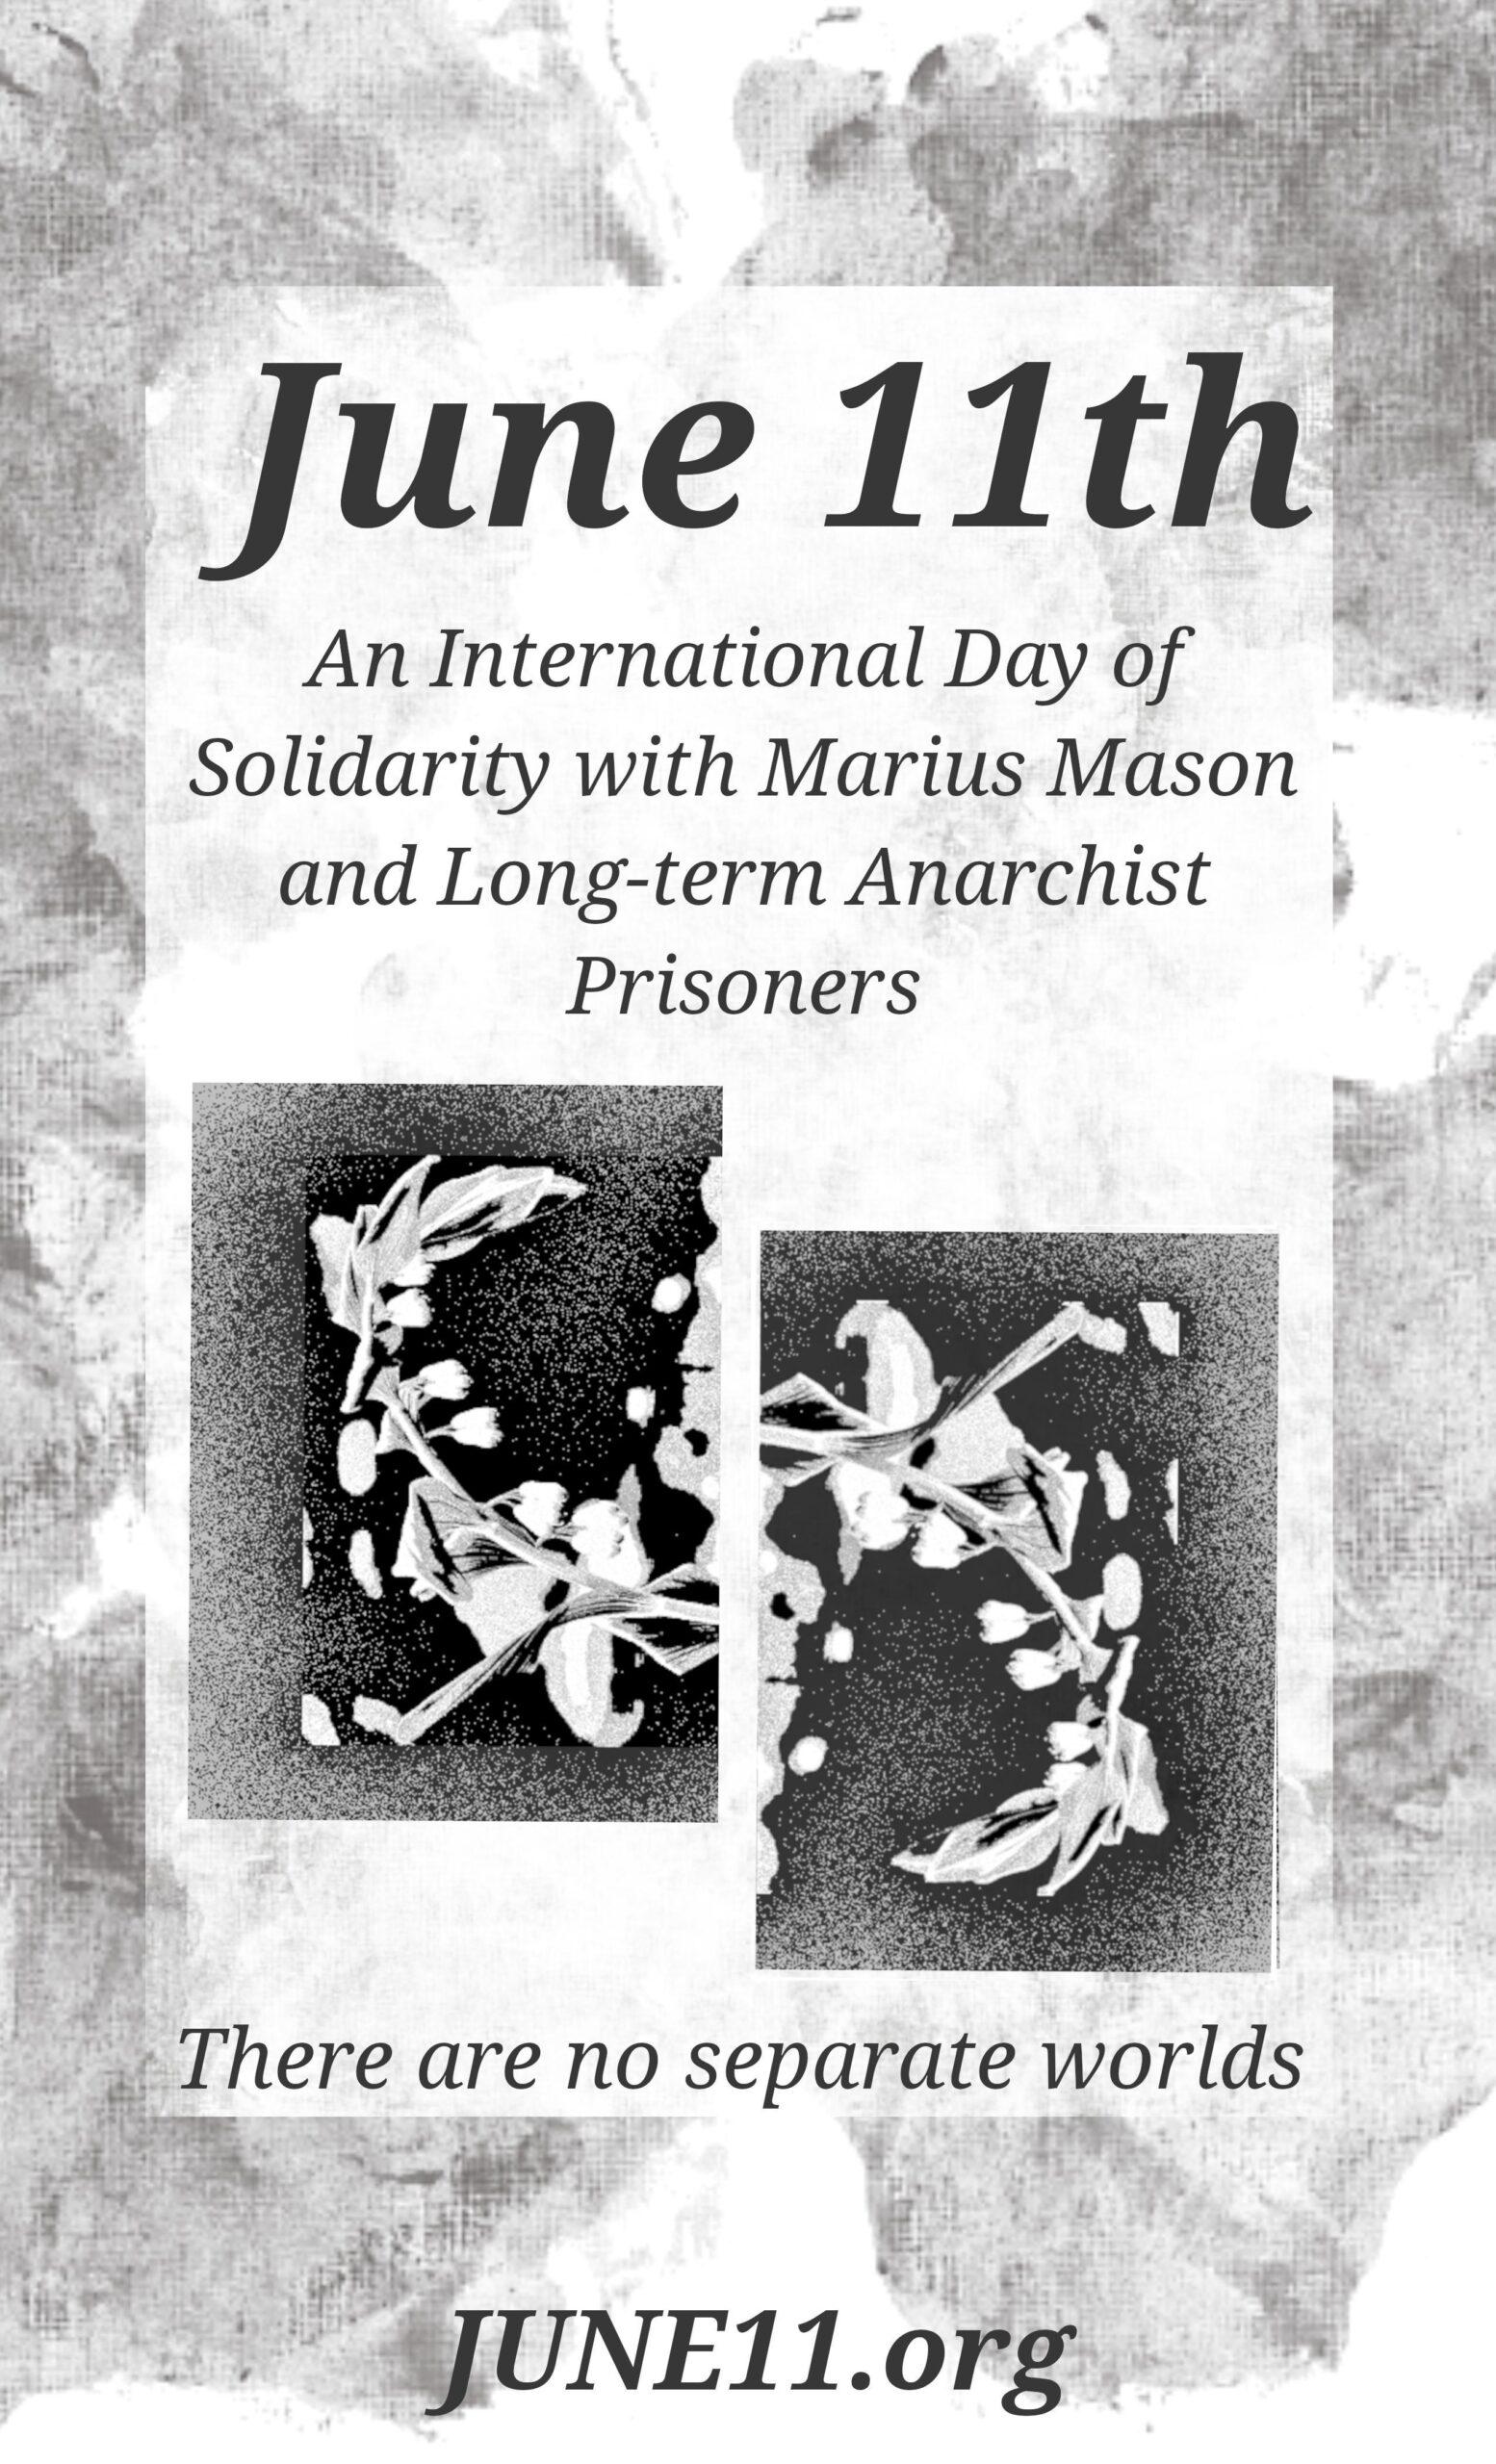 A Poster for June 11th Solidarity. It reads "June 11th, An International Day of Solidarity with Marius Mason and Long-term Anarchist Prisoners. There are no separate worlds. JUNE11.org" It is black and white with abstract and floral patterns.